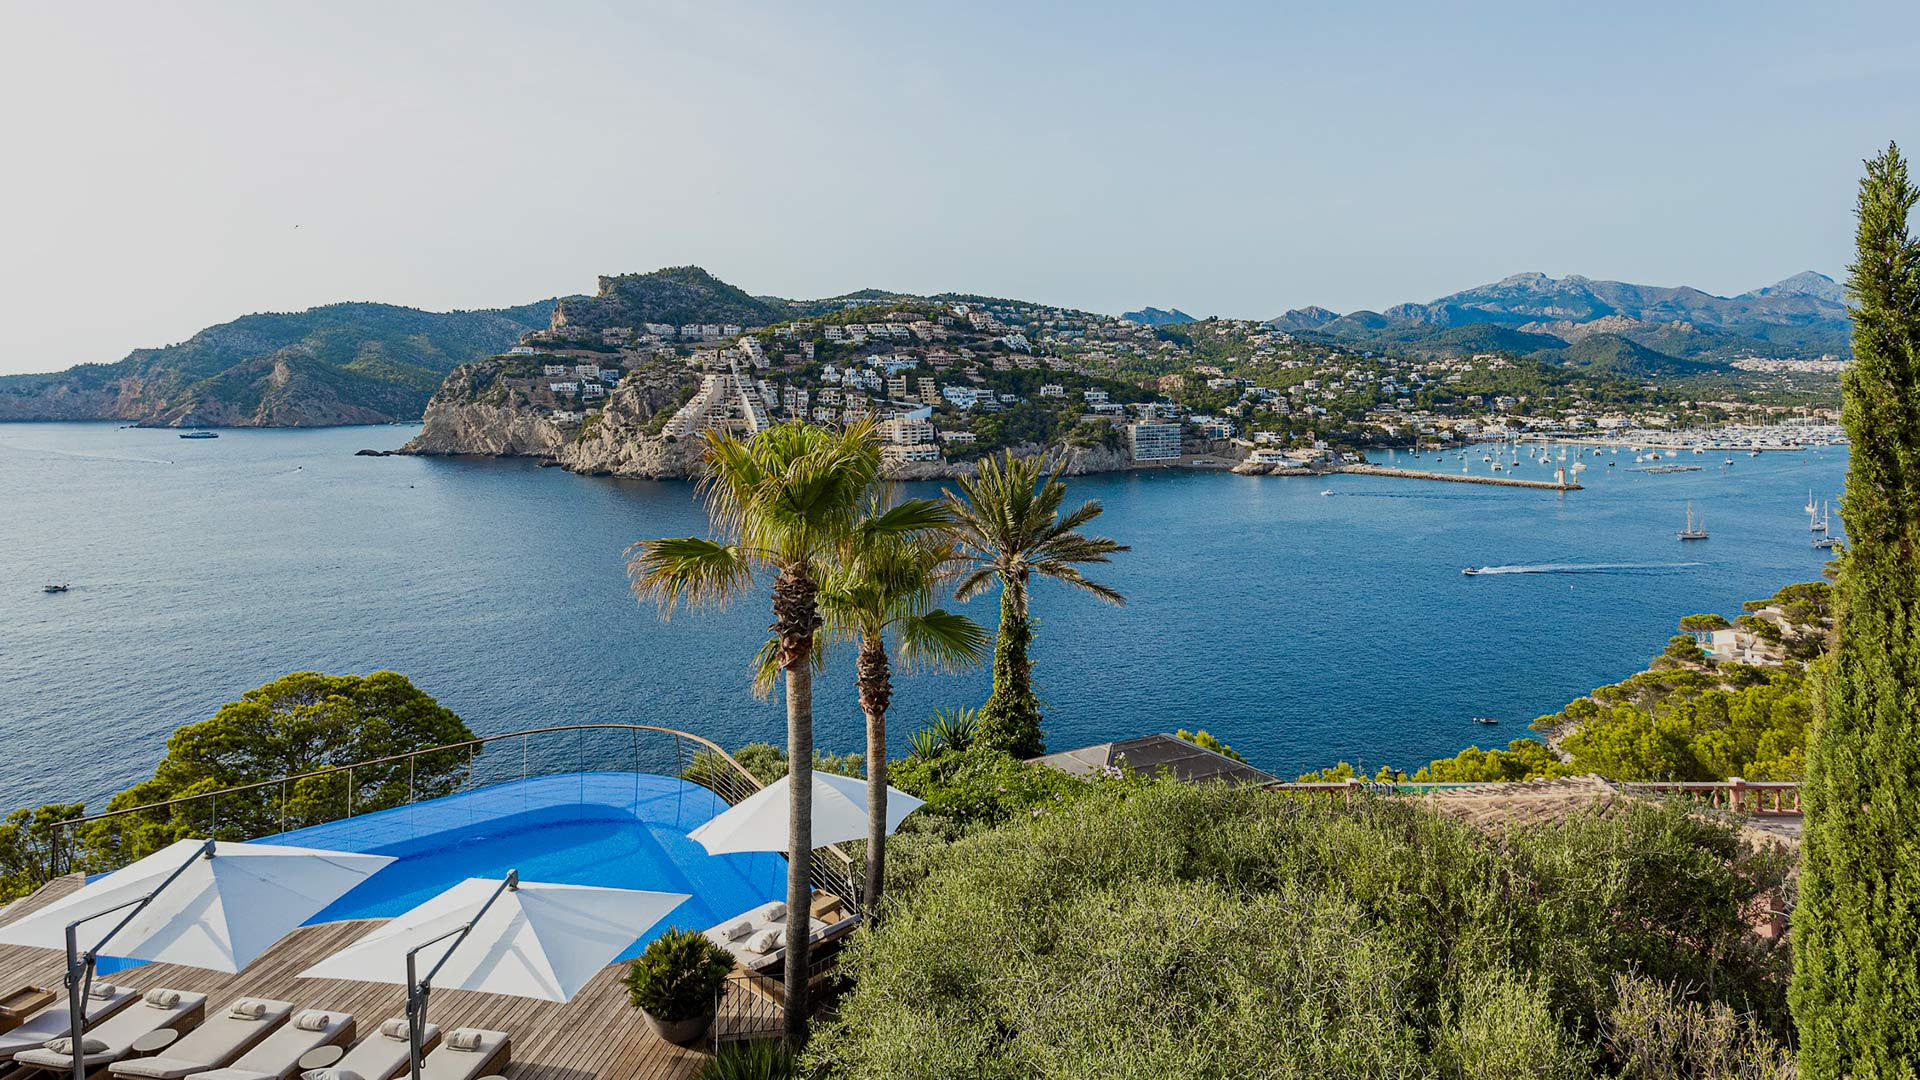 The Balearic Islands: The place to invest in real estate